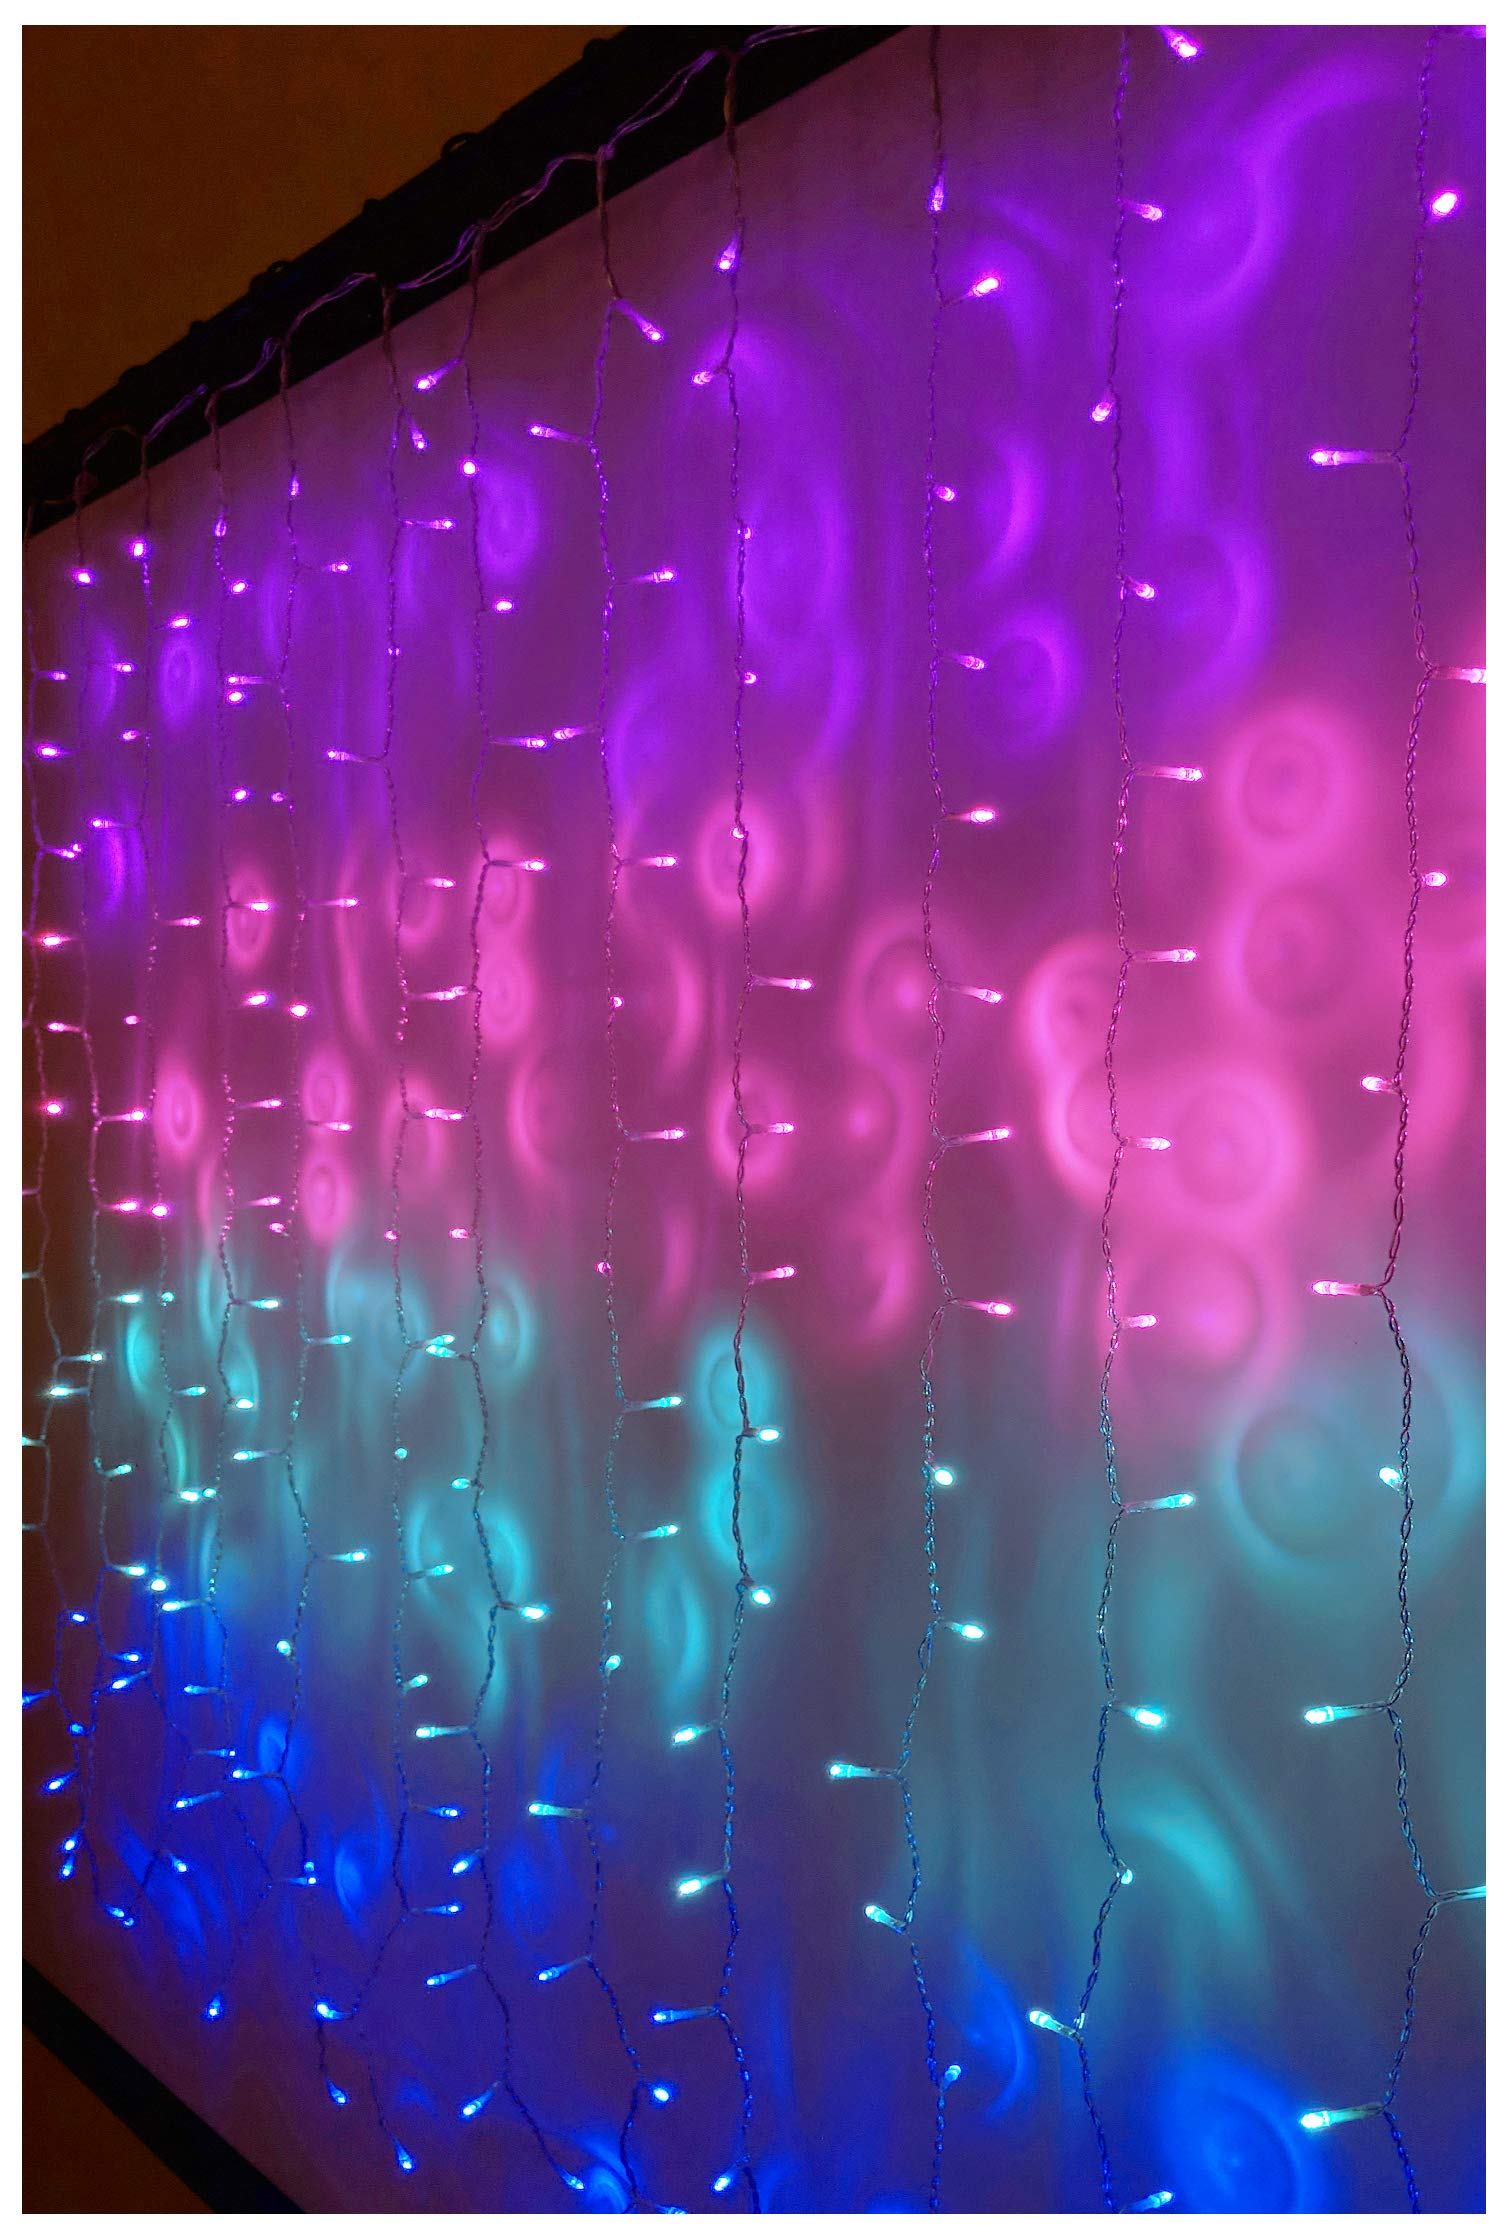 Book Cover Something Unicorn - LED String Curtain Lights with Dimmer Switch for Teen Room, Girls Room, College Dorm, Nursery and Kids Room Decor. Perfect for Mermaid, Purple, Pink Decoration. (Standard Version)